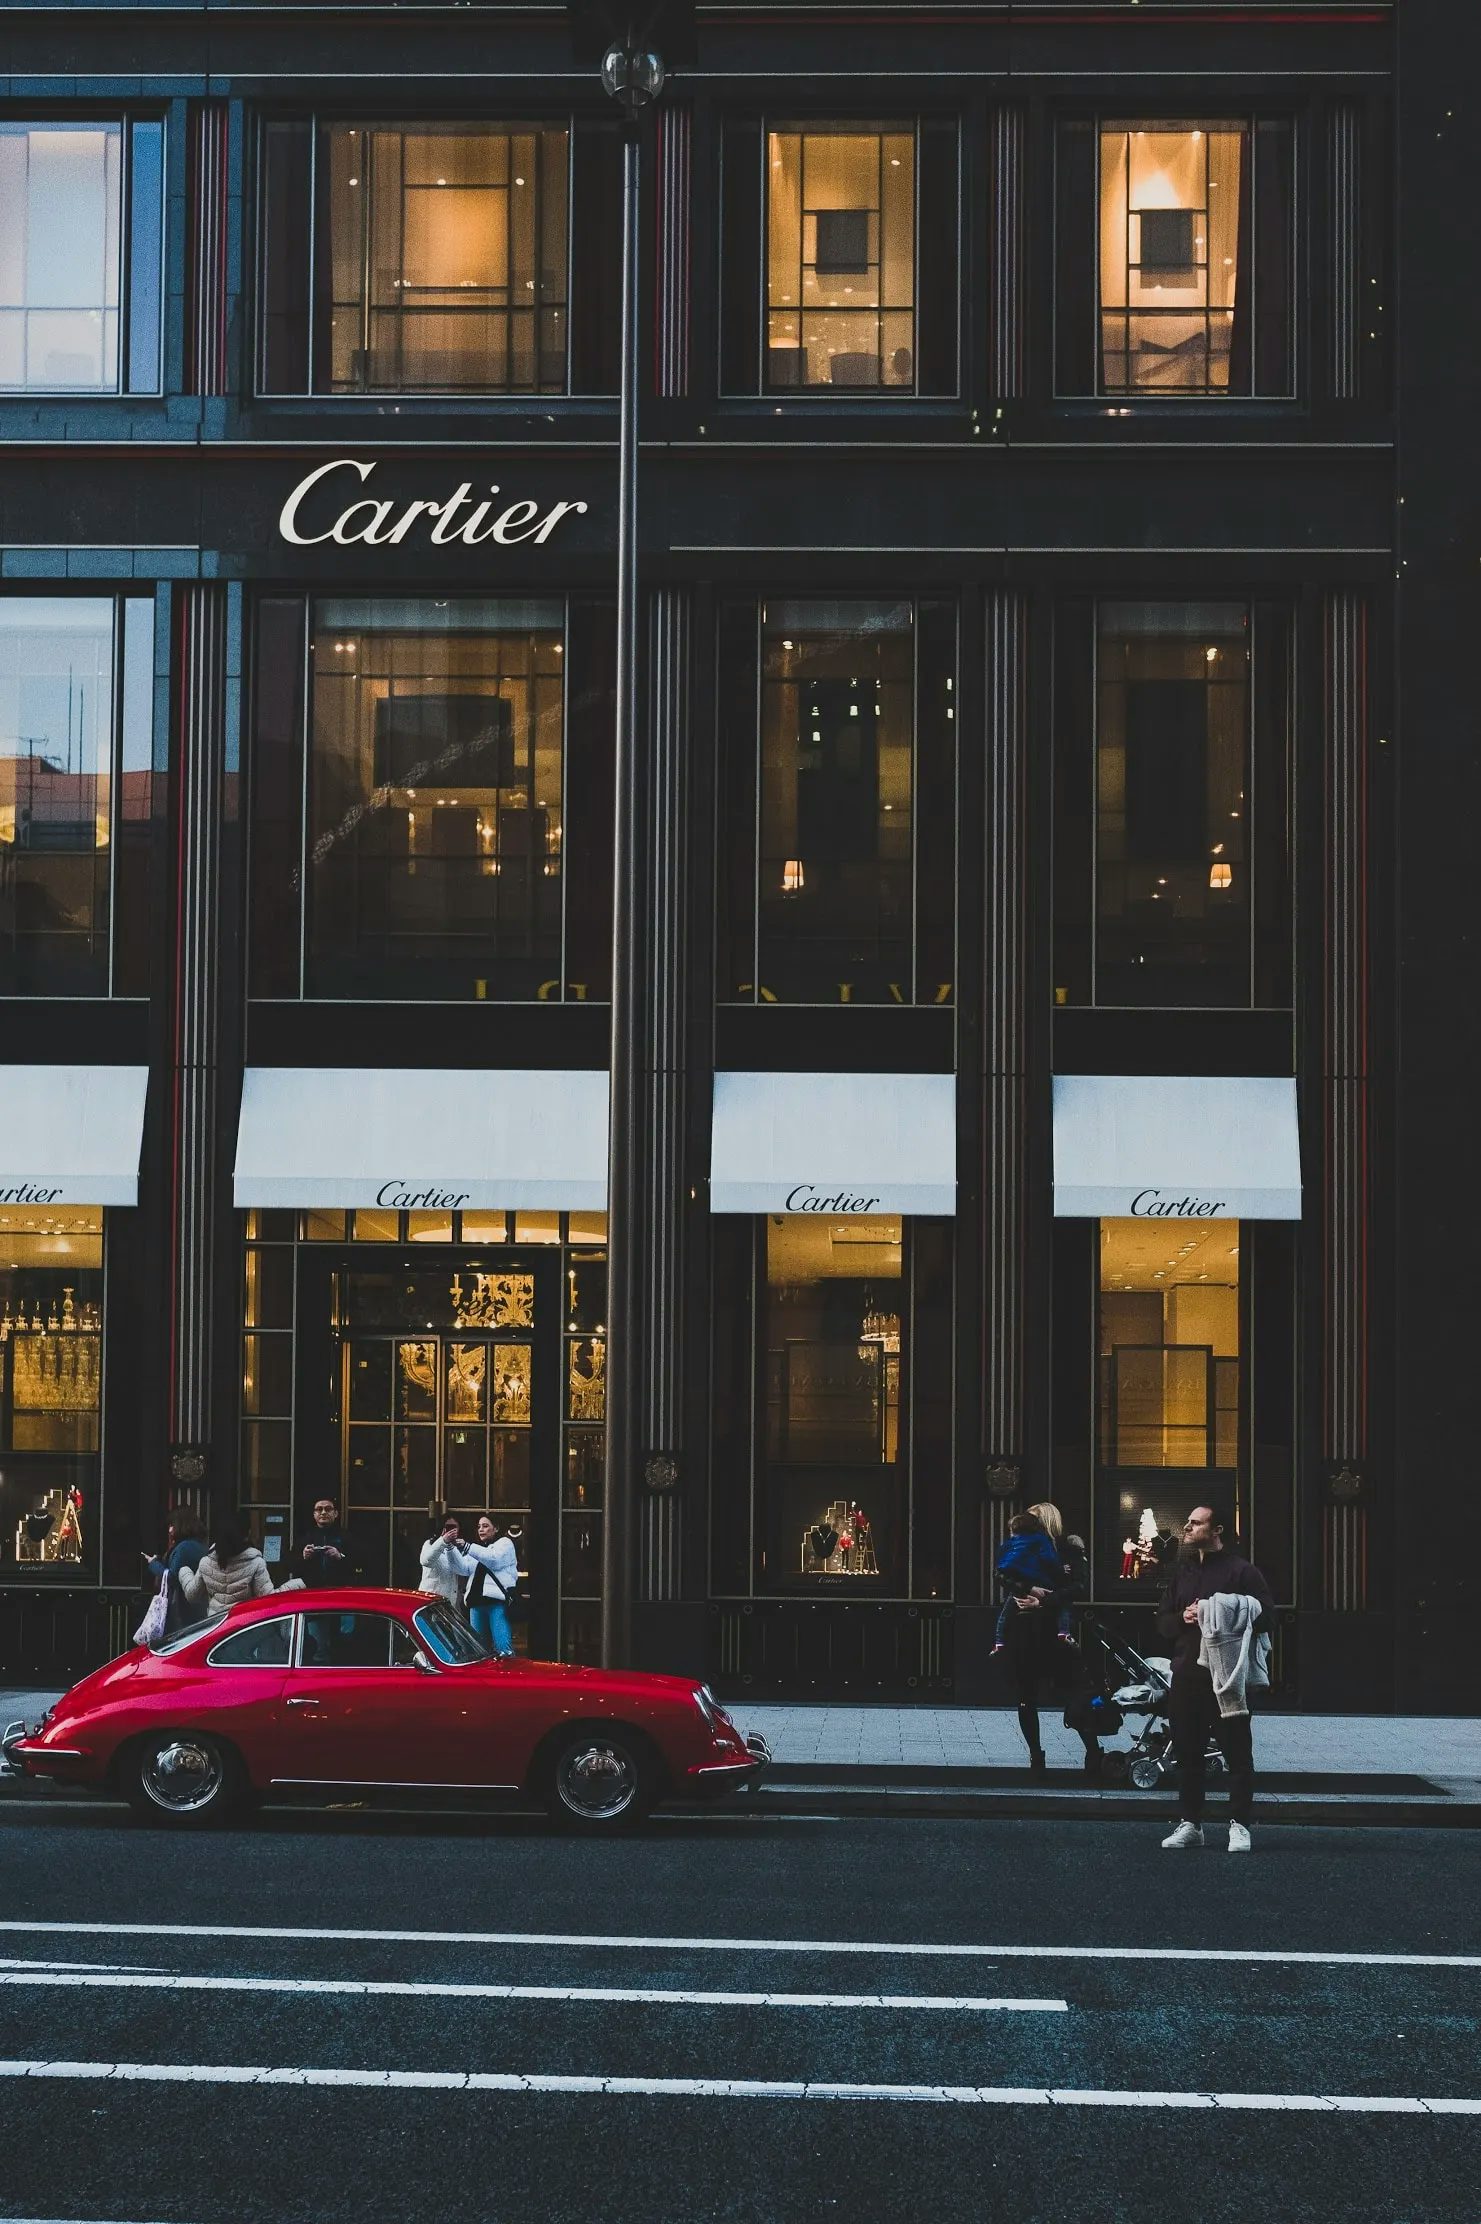 Image of car beside cartier store